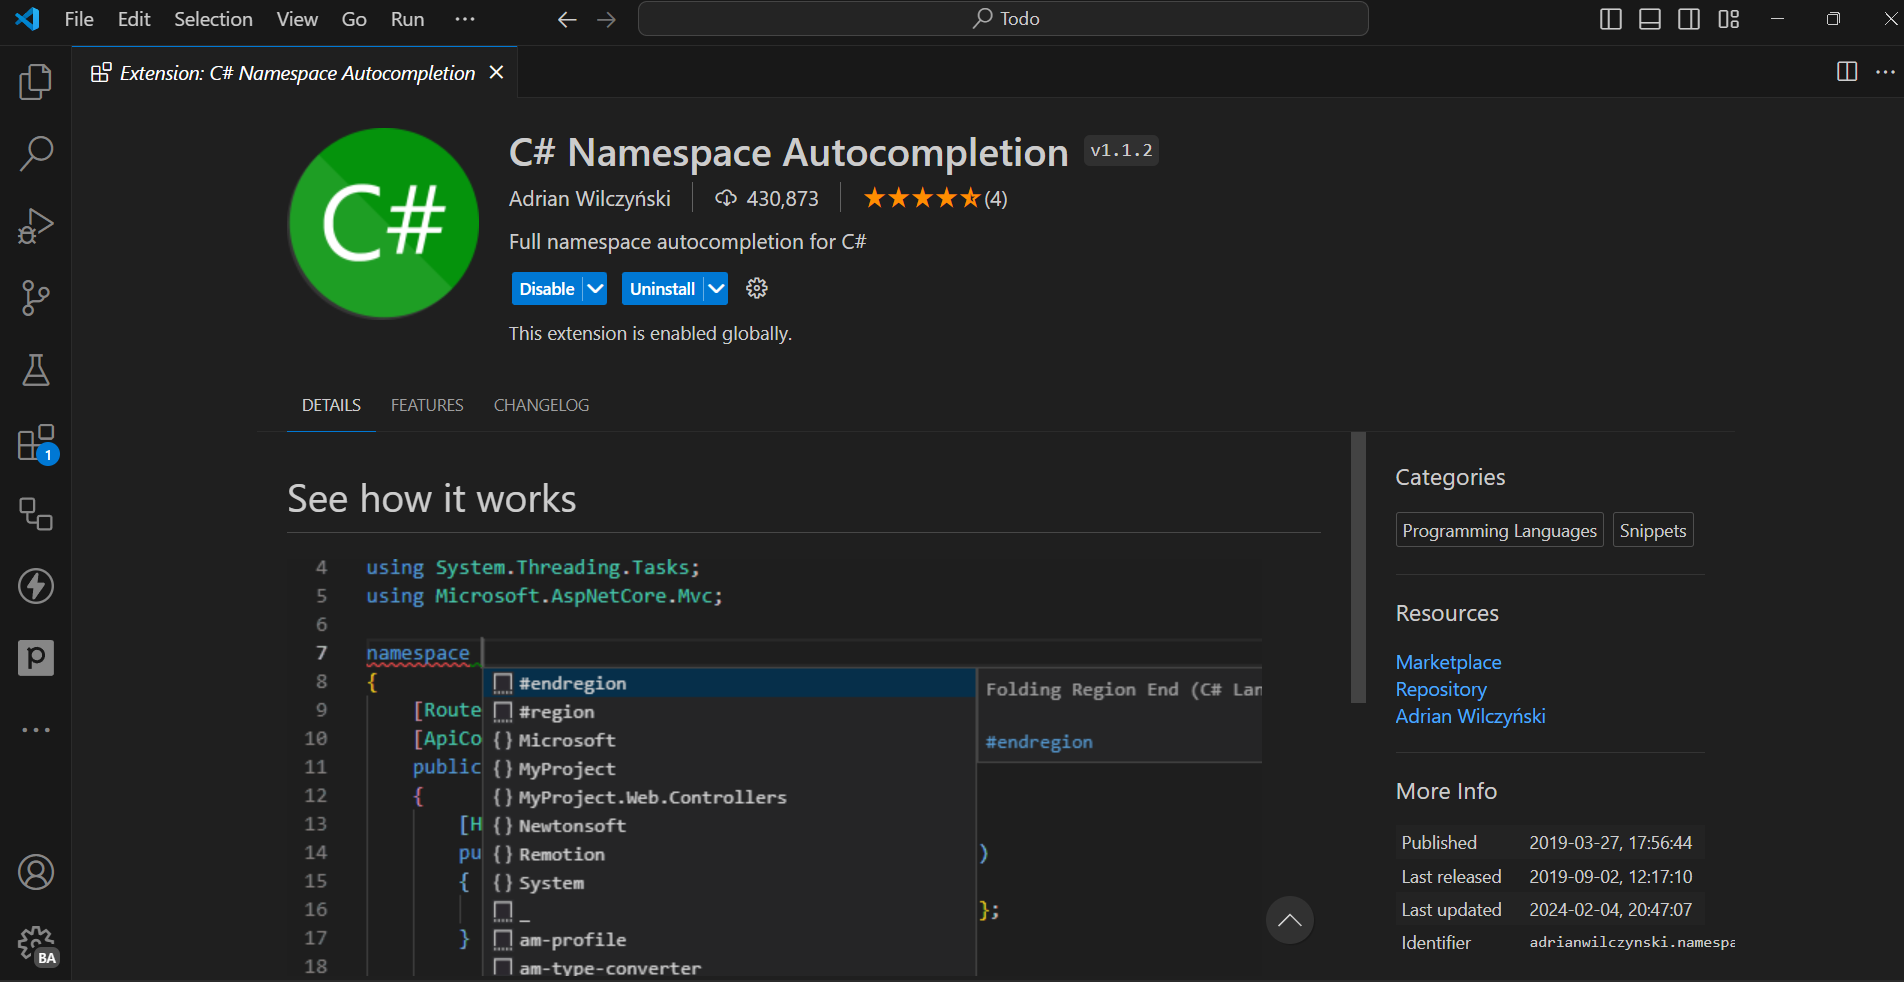 Extensions view for Namespace Autocompletion